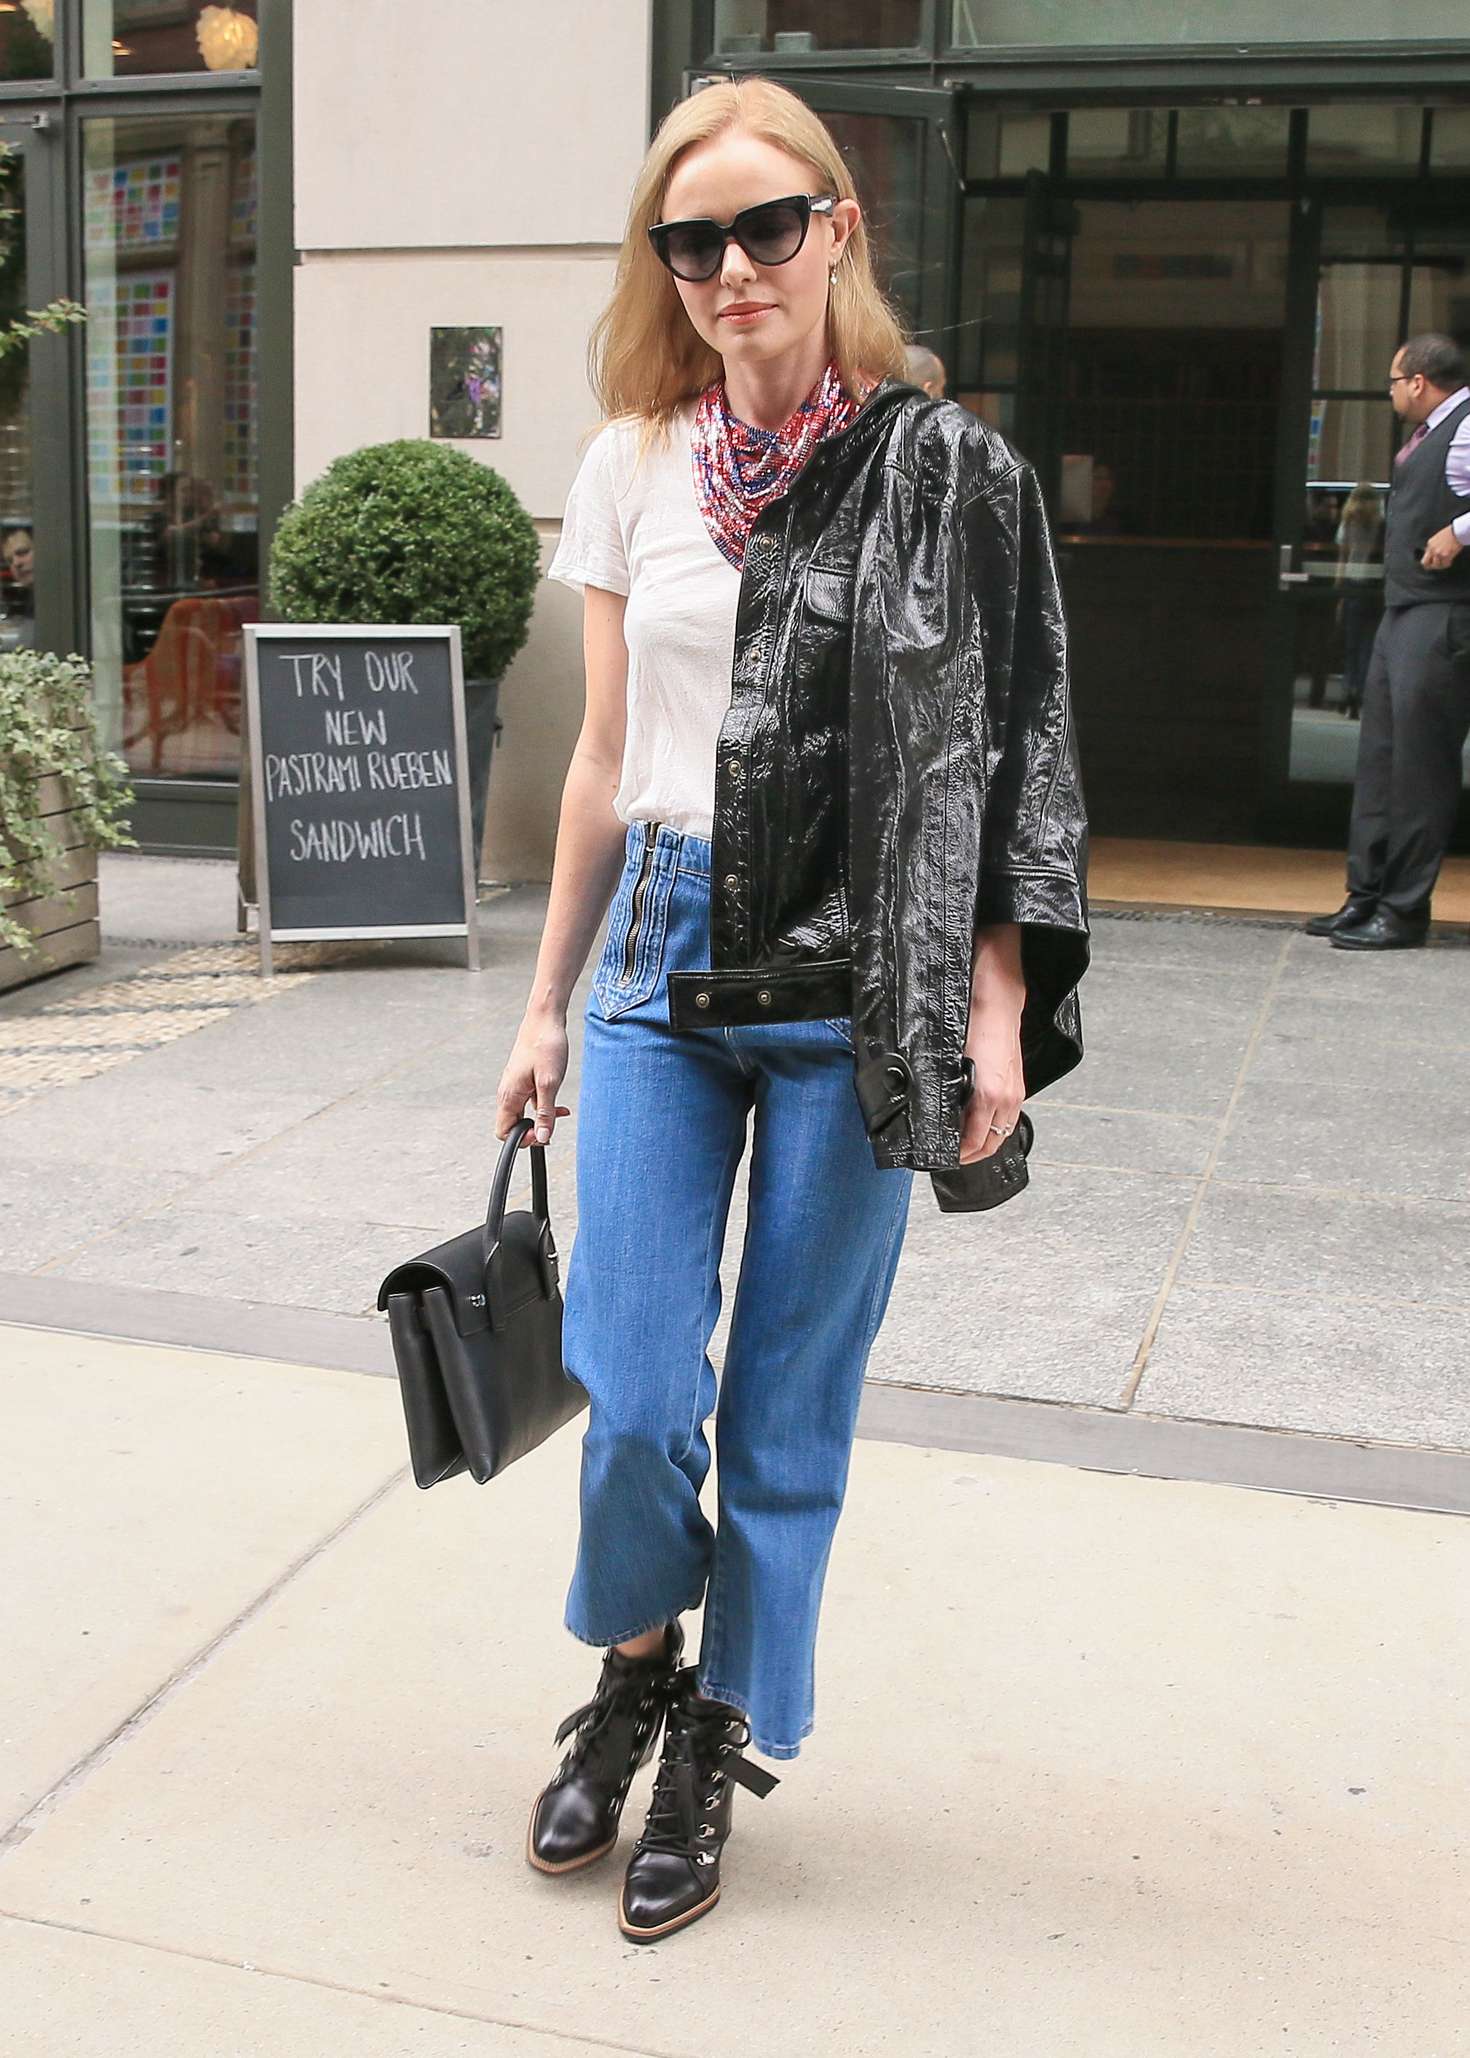 Kate Bosworth in Jeans -03 | GotCeleb